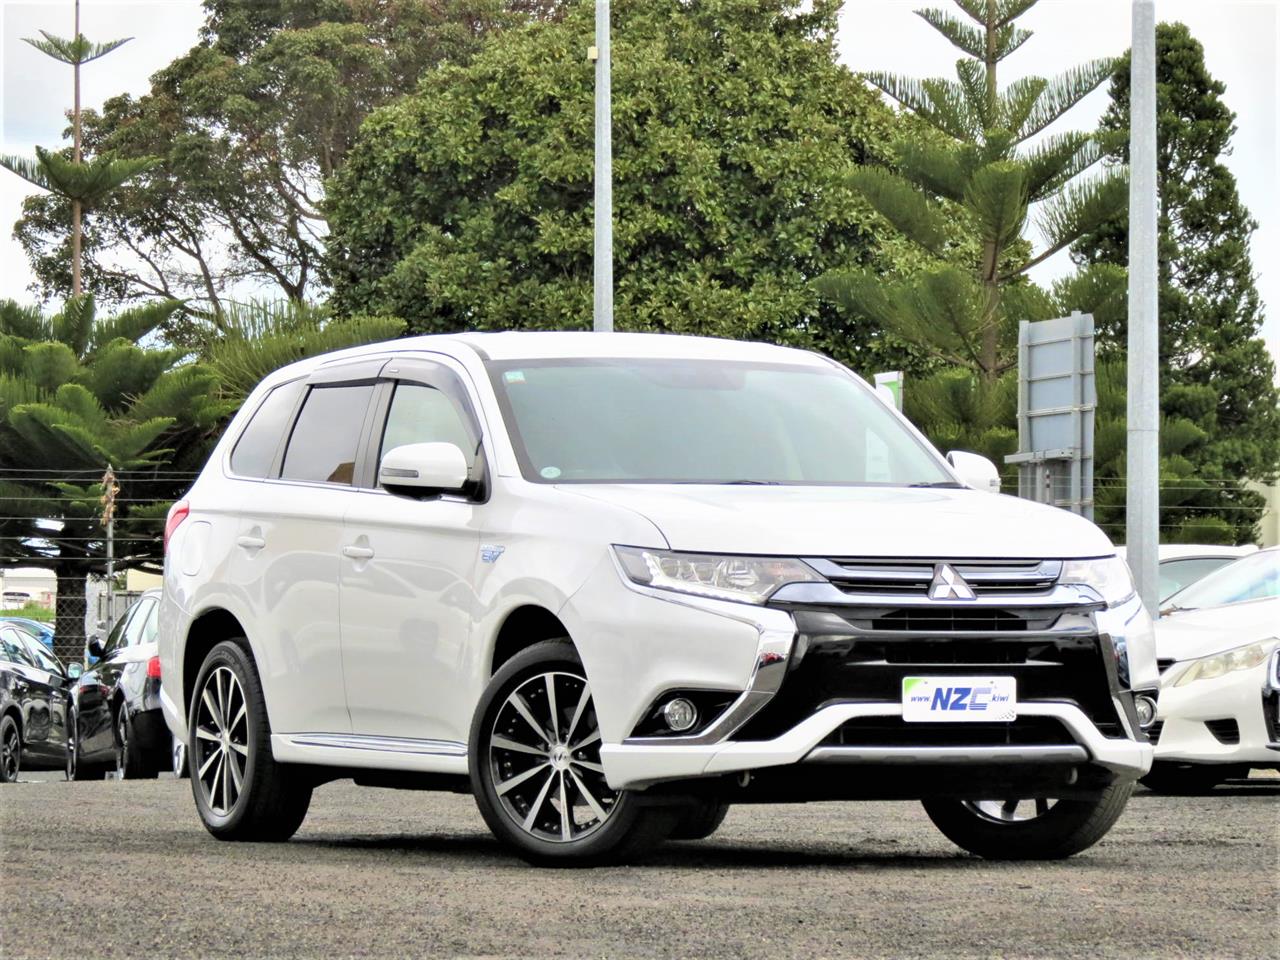 NZC 2016 Mitsubishi OUTLANDER PHEV just arrived to Auckland